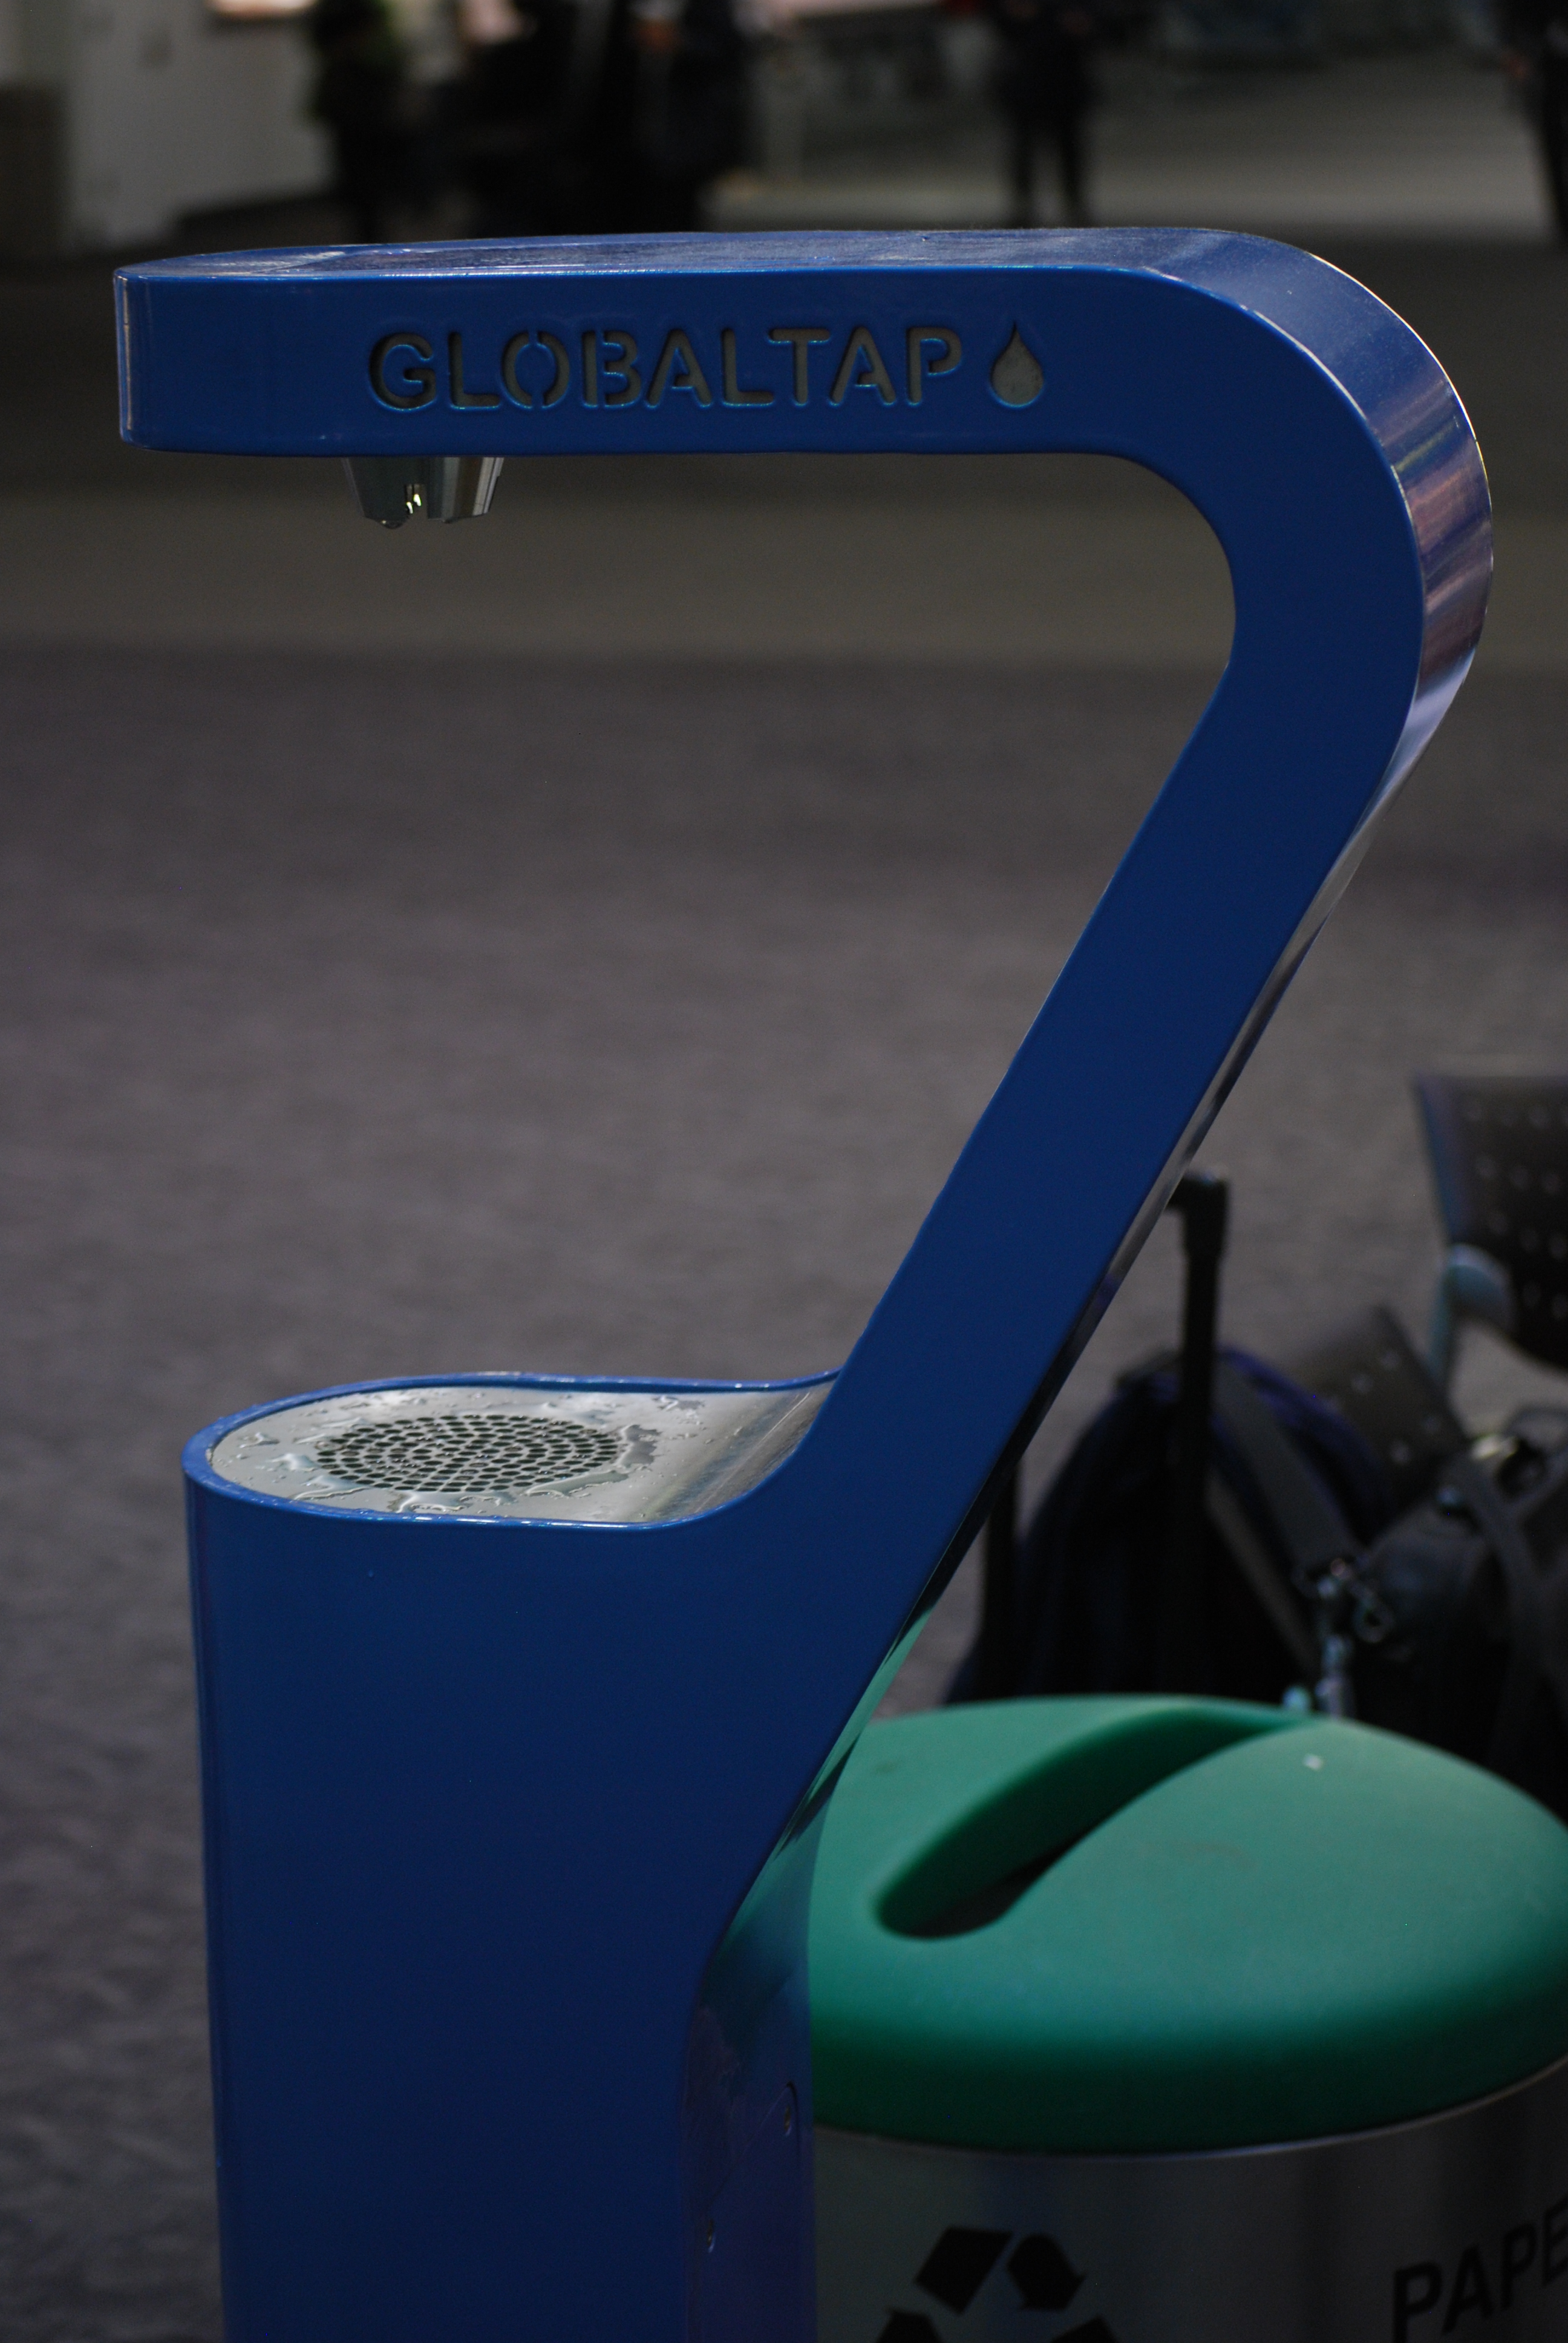 GlobalTap Fountain at the San Francisco Airport. (Source: P.Gleick 2013)